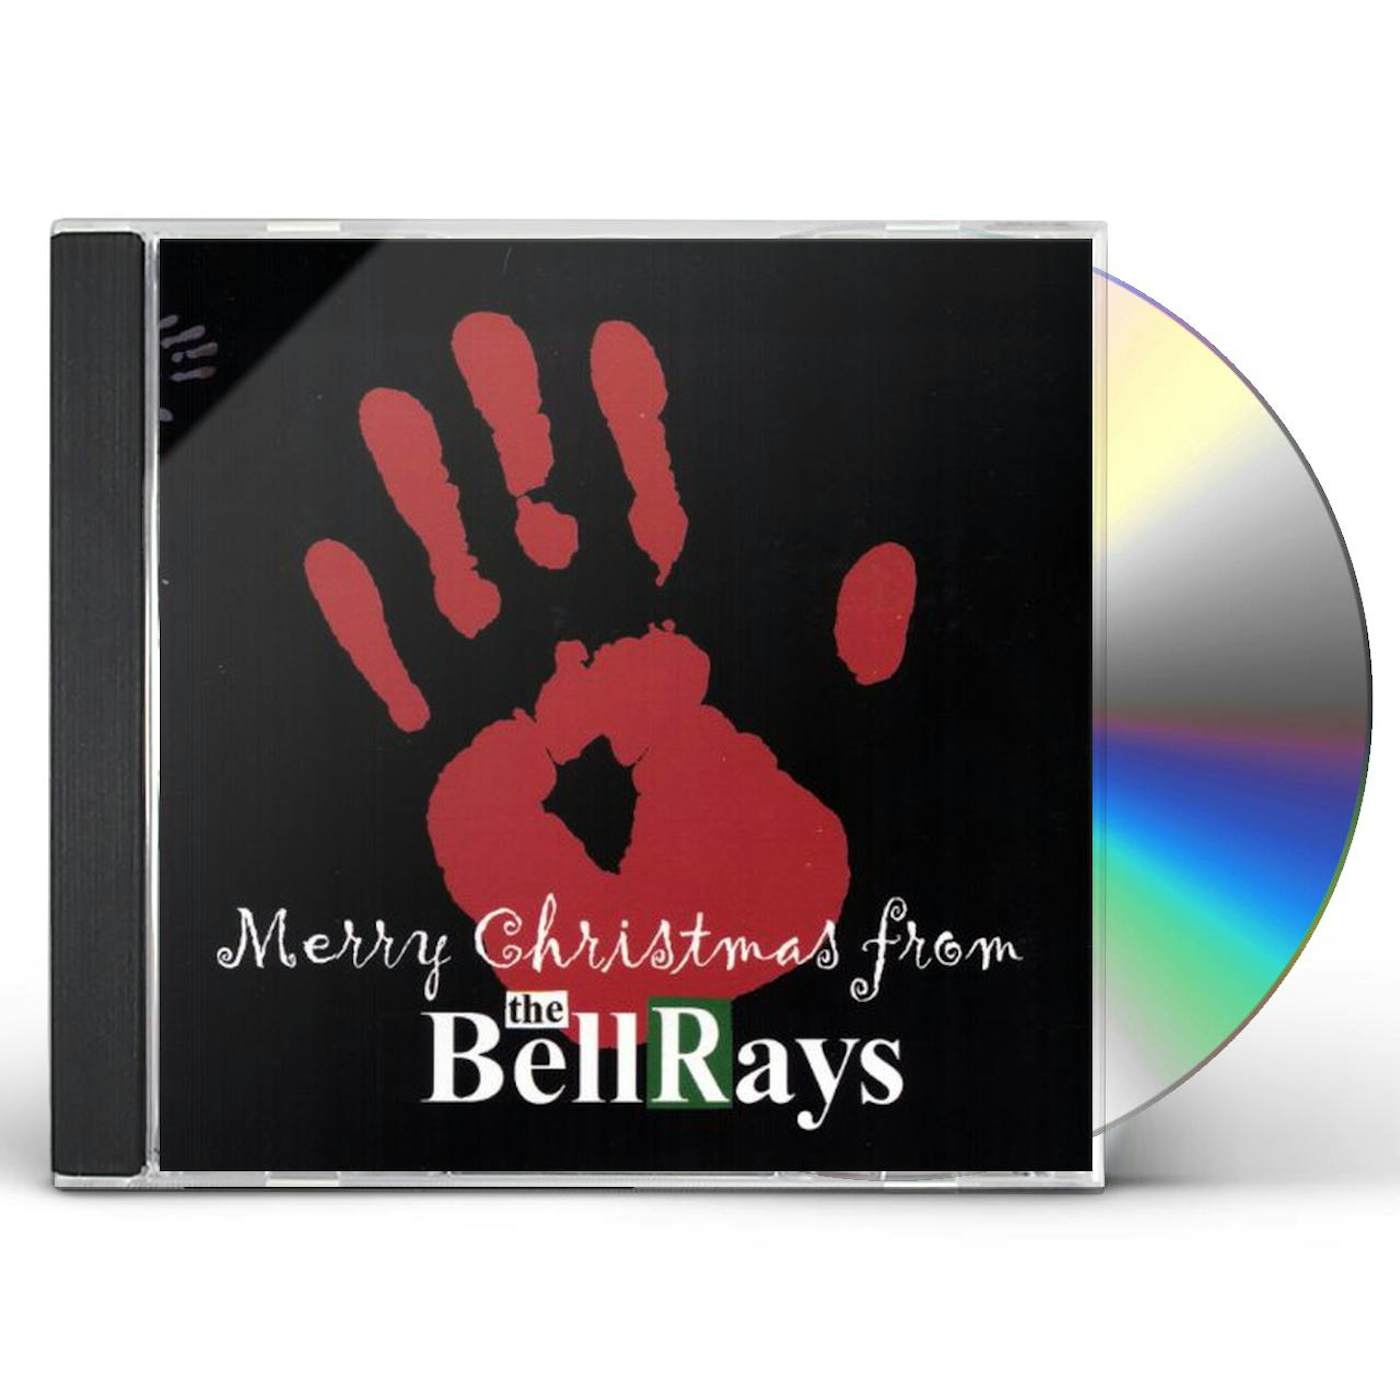 MERRY CHRISTMAS FROM THE BELLRAYS CD